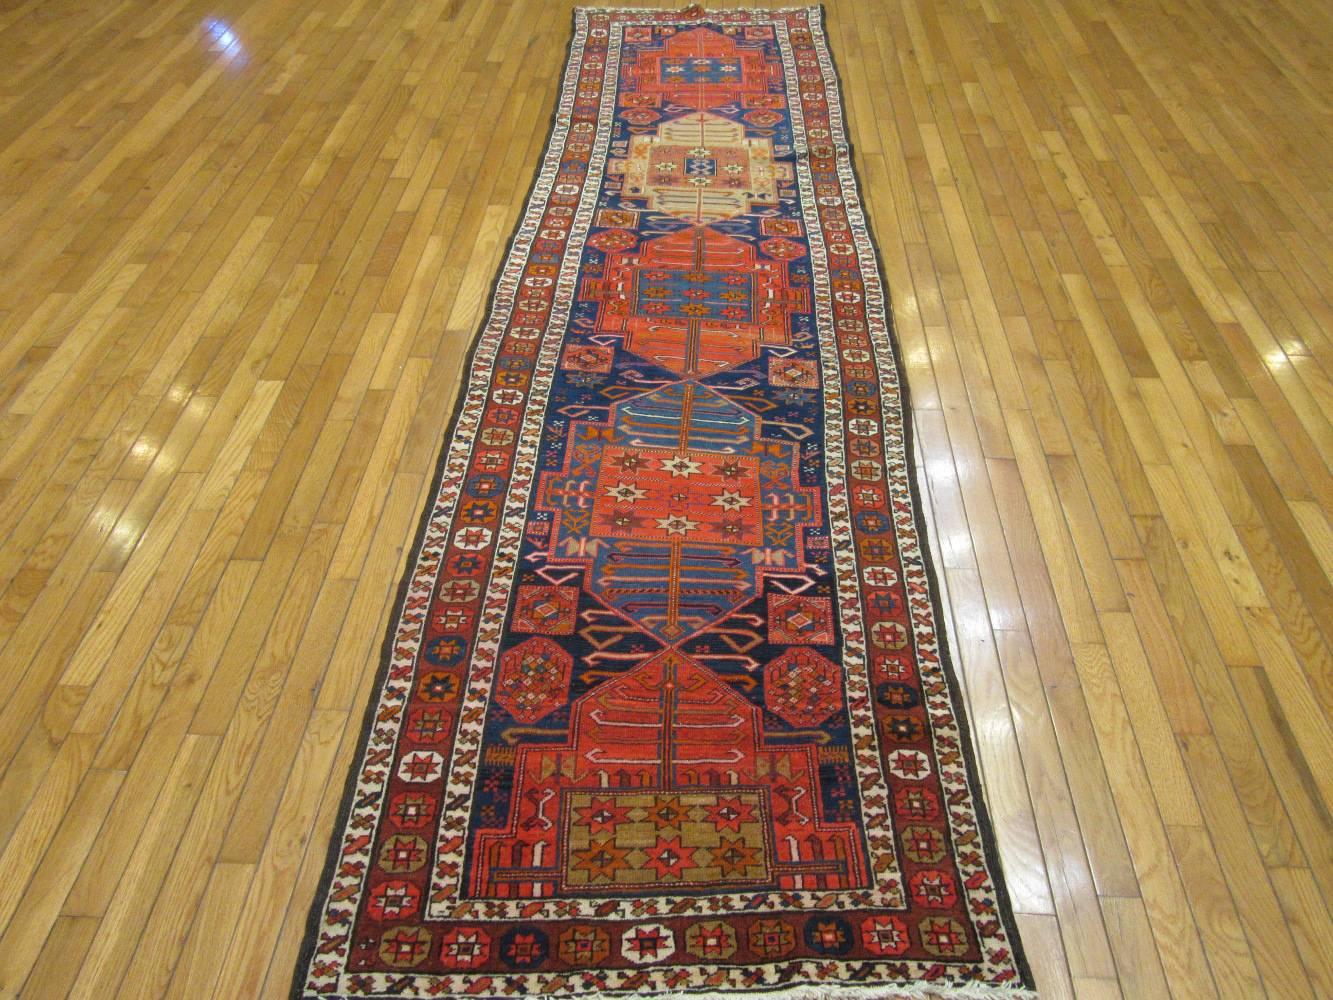 This is an antique hand-knotted runner rug from northwest Iran (Persia) with a simple multi medallion nomadic design in rich natural dye colors. It is made with wool pile and cotton foundation. The rug measures 3' x 10' 10'' and in great condition.